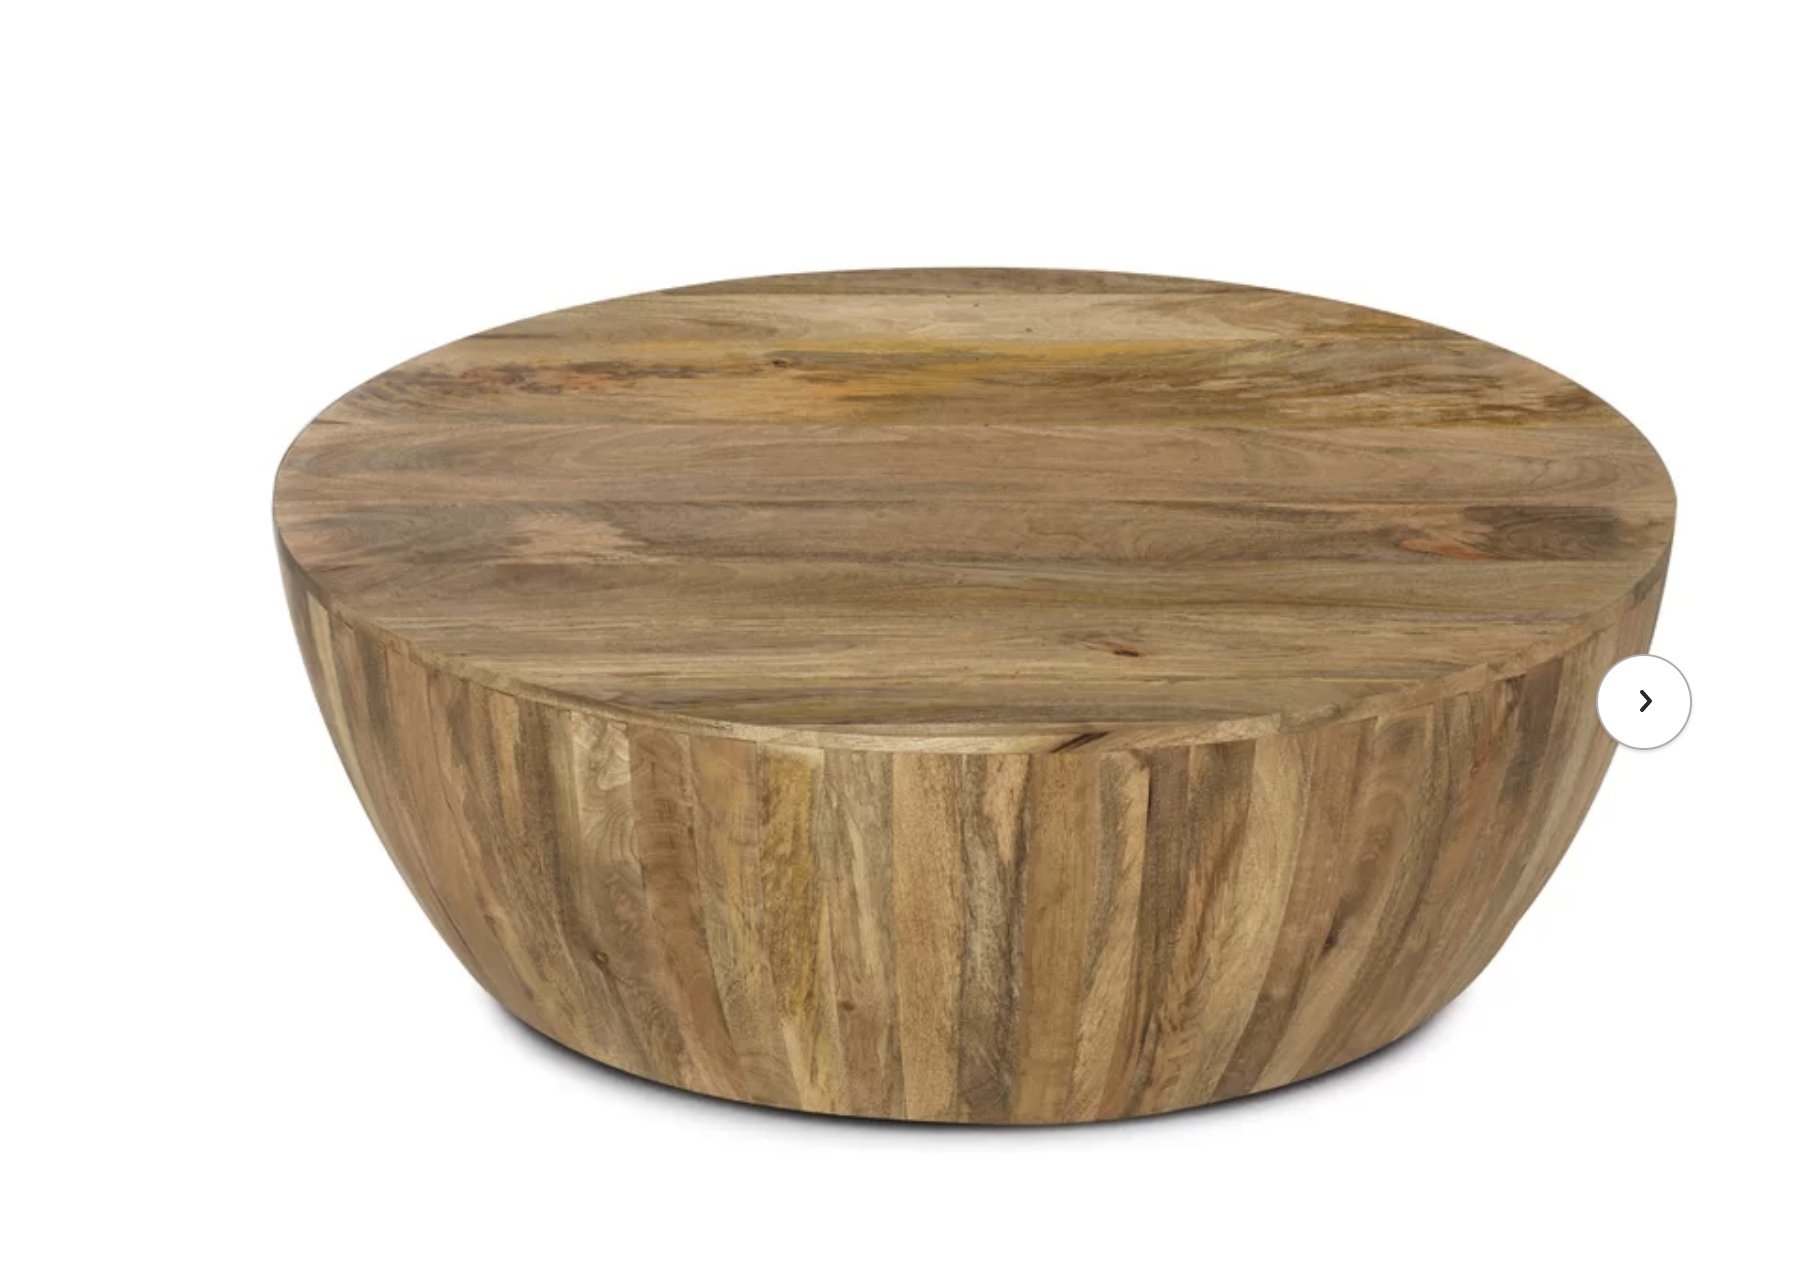 Dereham Coffee Table - natural - Image 1